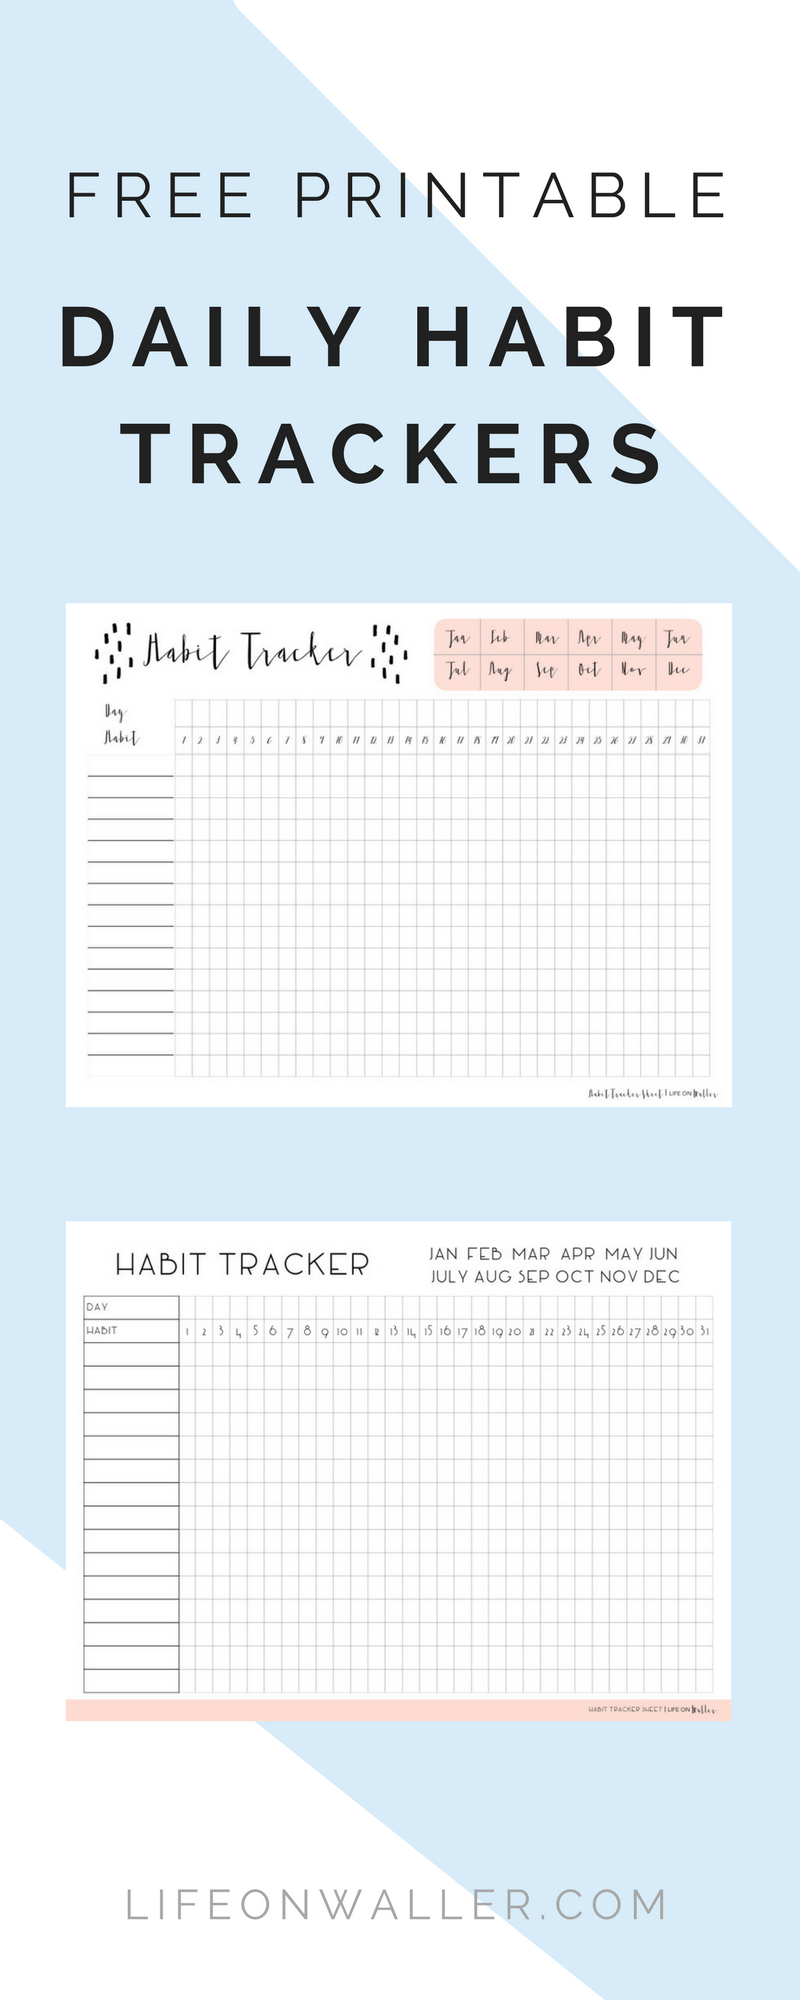 Daily Habit Tracker Free Printables | Best Of Cassiescroggins - Free Printable Habit Tracker